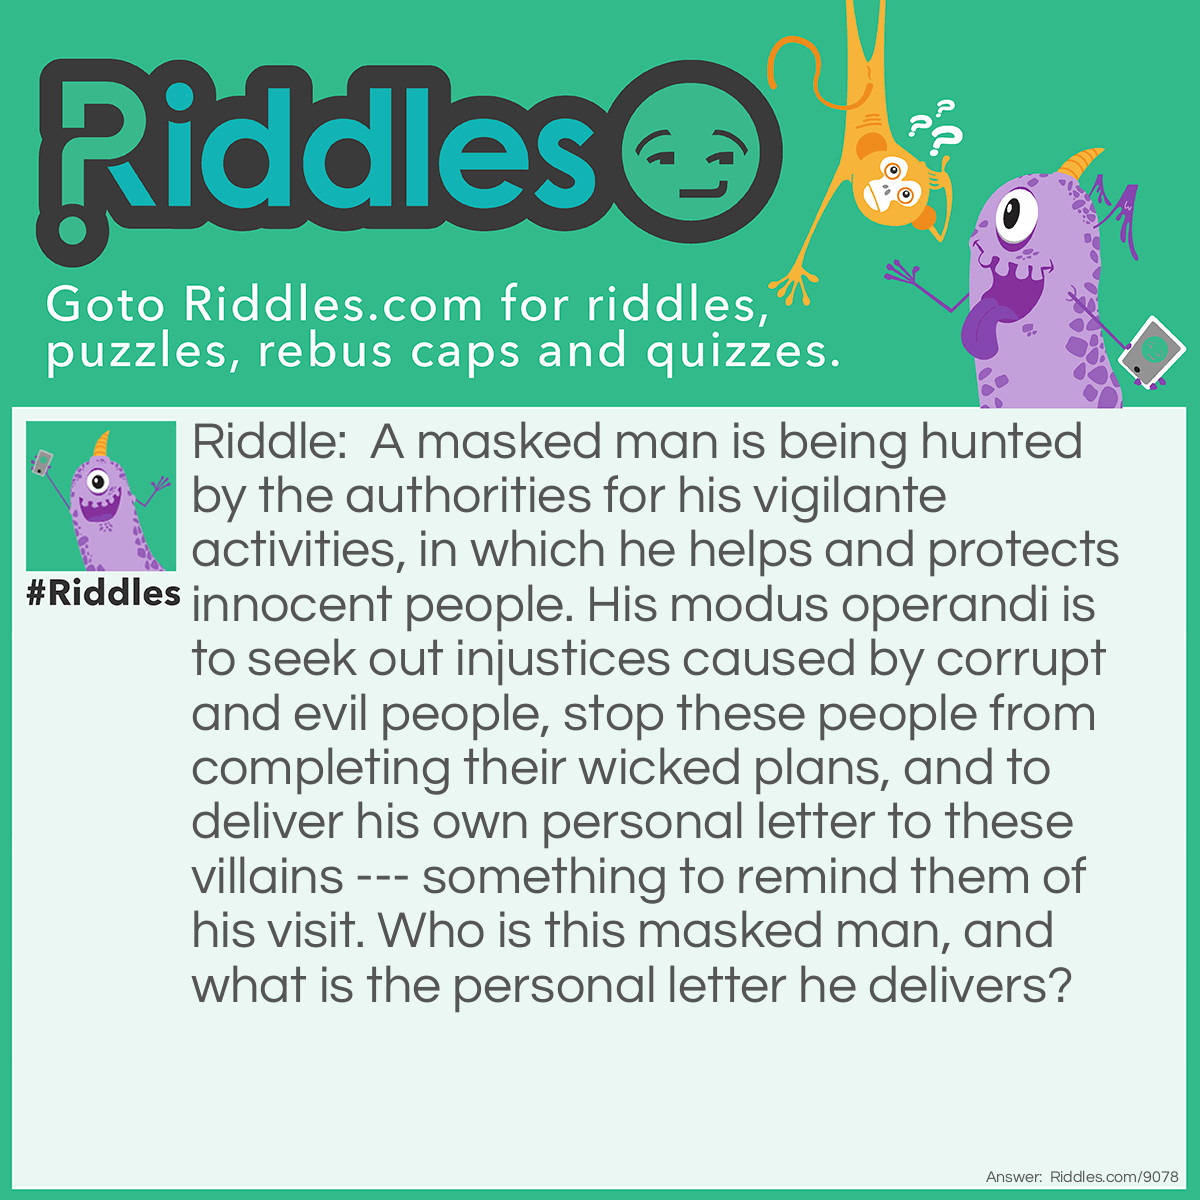 Riddle: A masked man is being hunted by the authorities for his vigilante activities, in which he helps and protects innocent people. His modus operandi is to seek out injustices caused by corrupt and evil people, stop these people from completing their wicked plans, and to deliver his own personal letter to these villains --- something to remind them of his visit. Who is this masked man, and what is the personal letter he delivers? Answer: The masked man is Zorro, and the personal letter he delivers to the villains he thwarts ----- is the letter "Z".